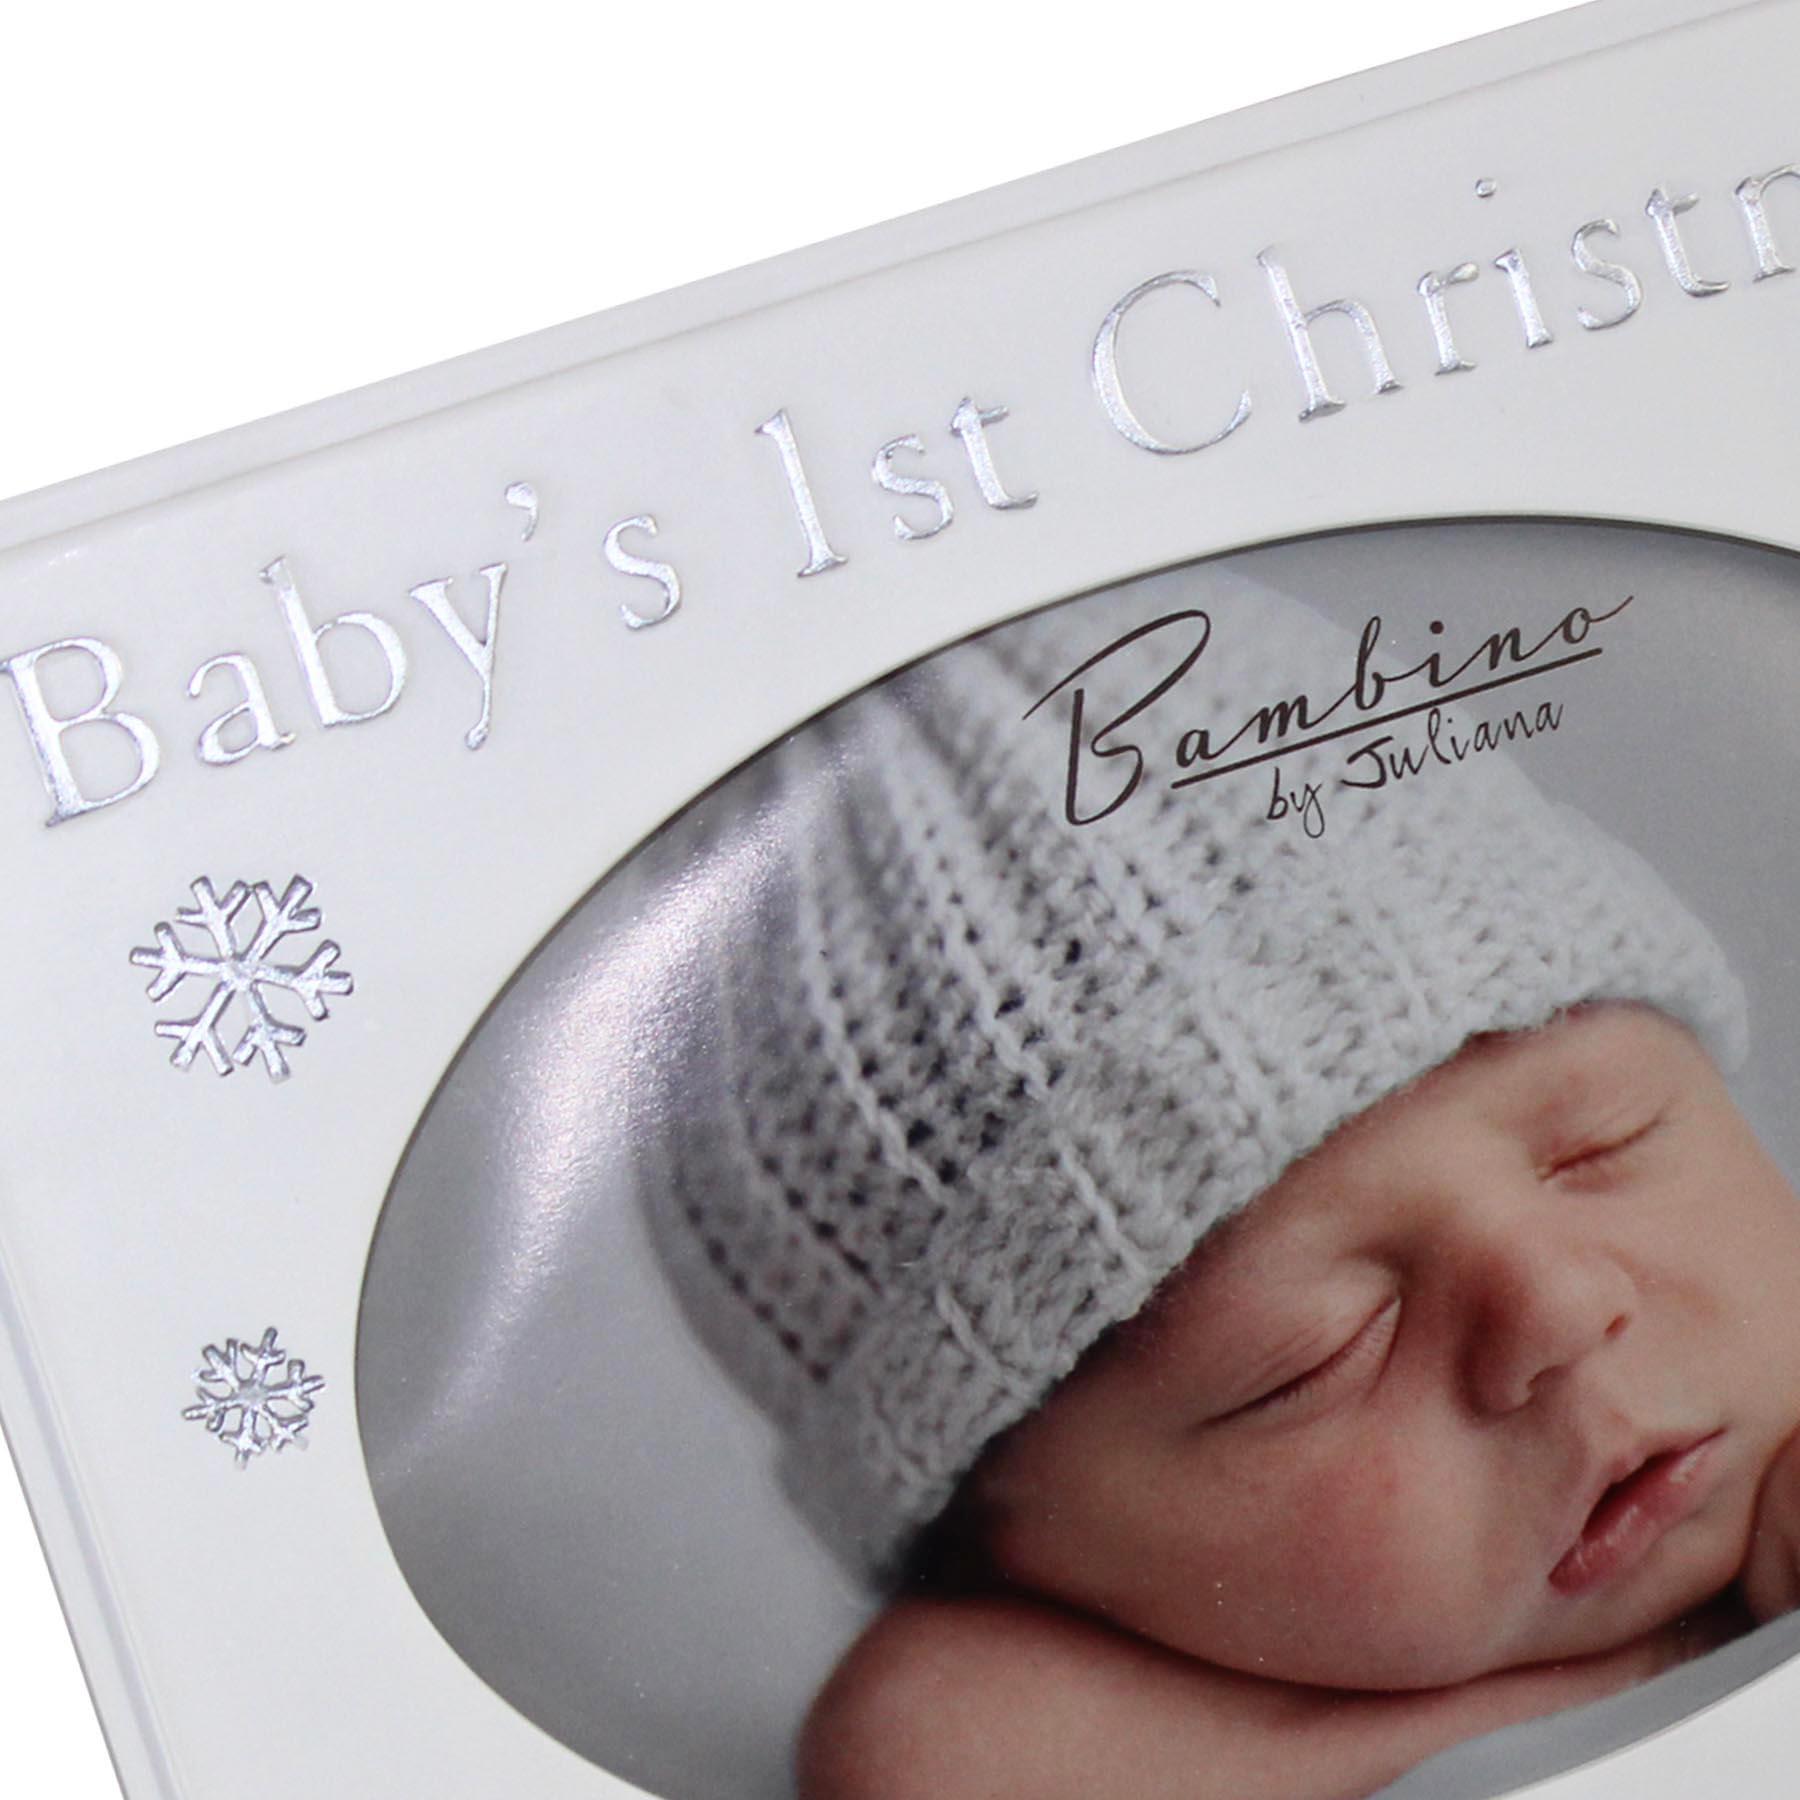 Baby's 1st Christmas 4x6 Resin Photo Frame - White and Silver